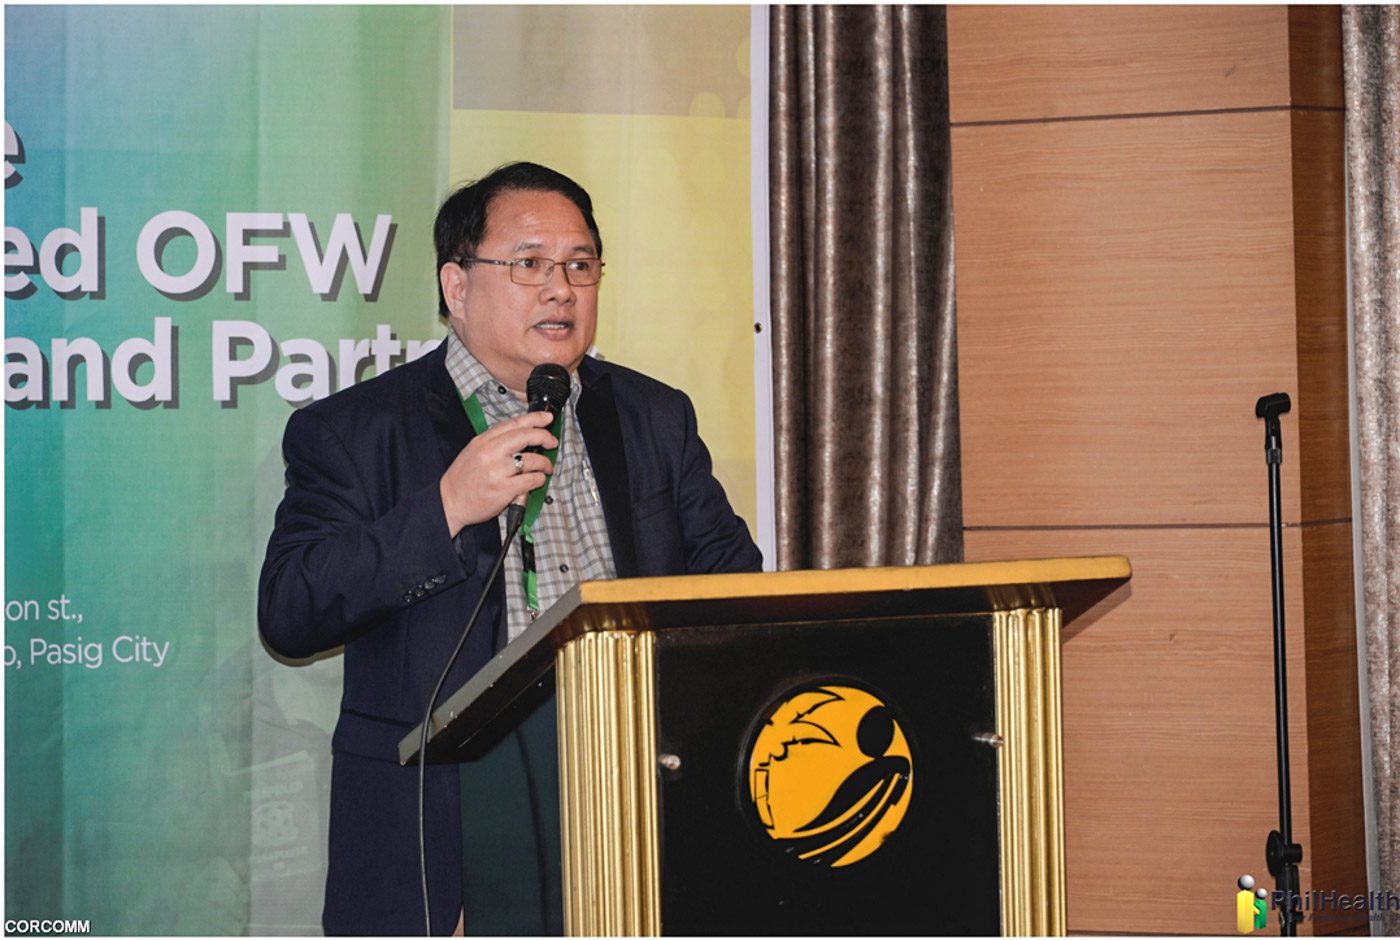 Another PhilHealth acting president accused of corruption